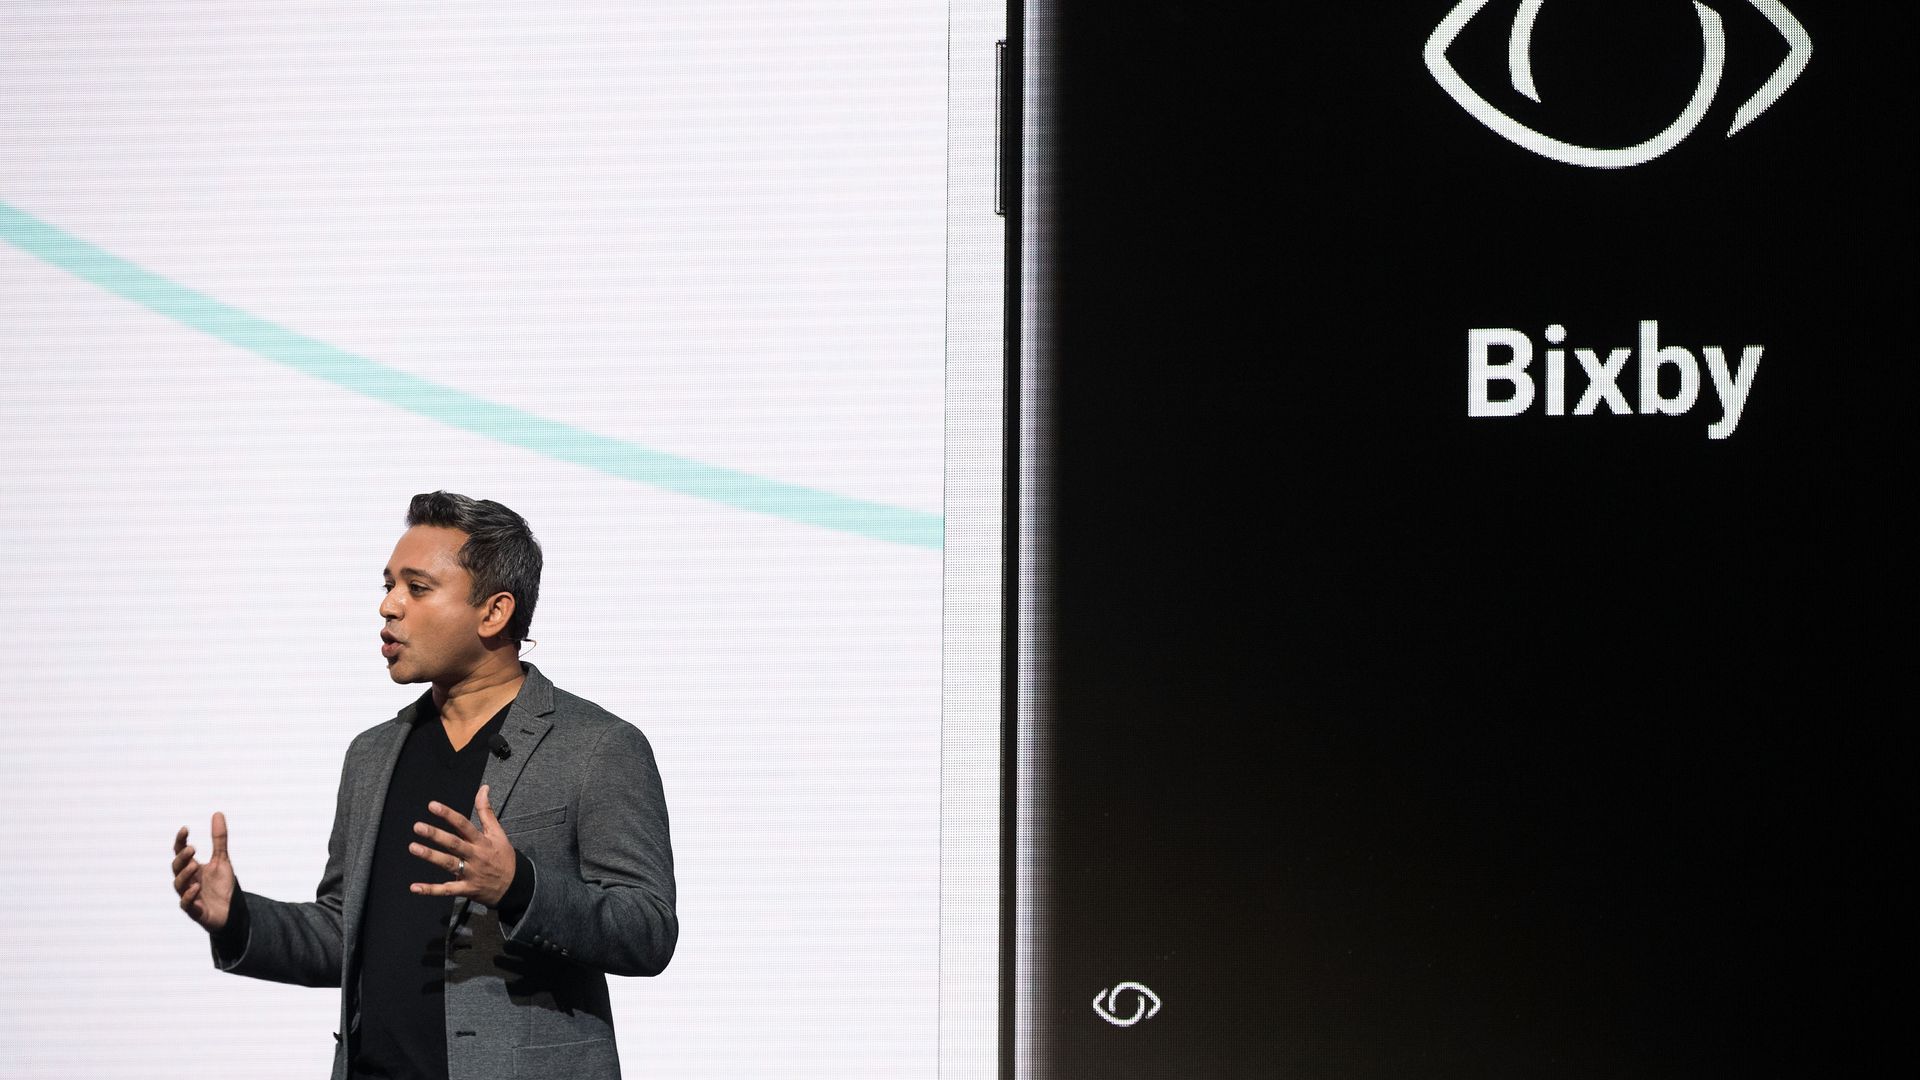 Sriram Thodla, senior director of services and new business at Samsung, talks about Bixby at the Samsung Galaxy S8 launch in 2017